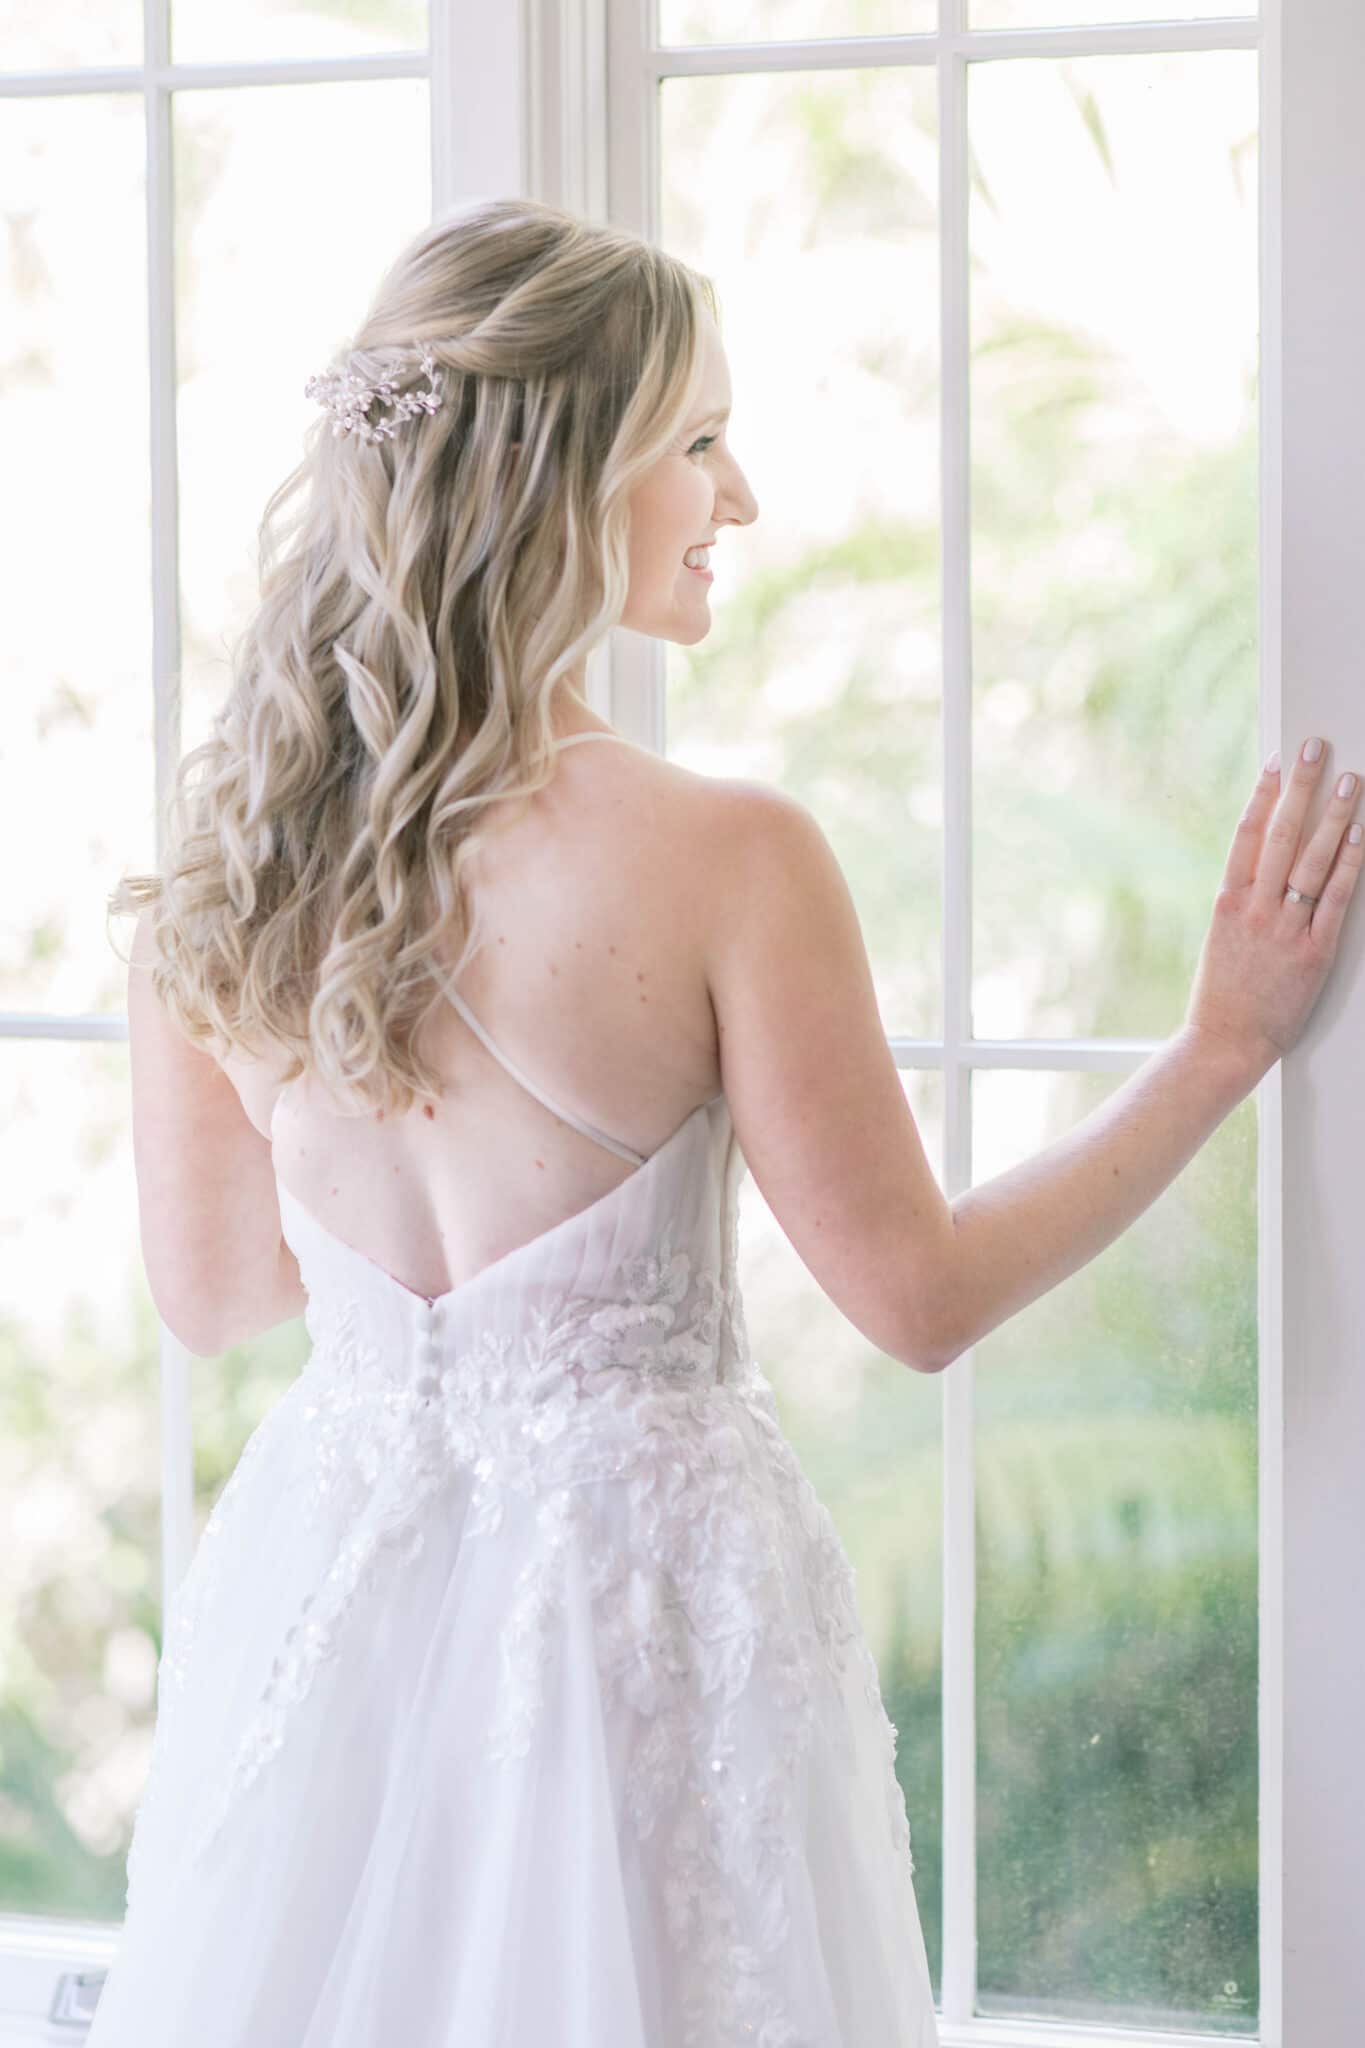 Bride smiling standing by a window.